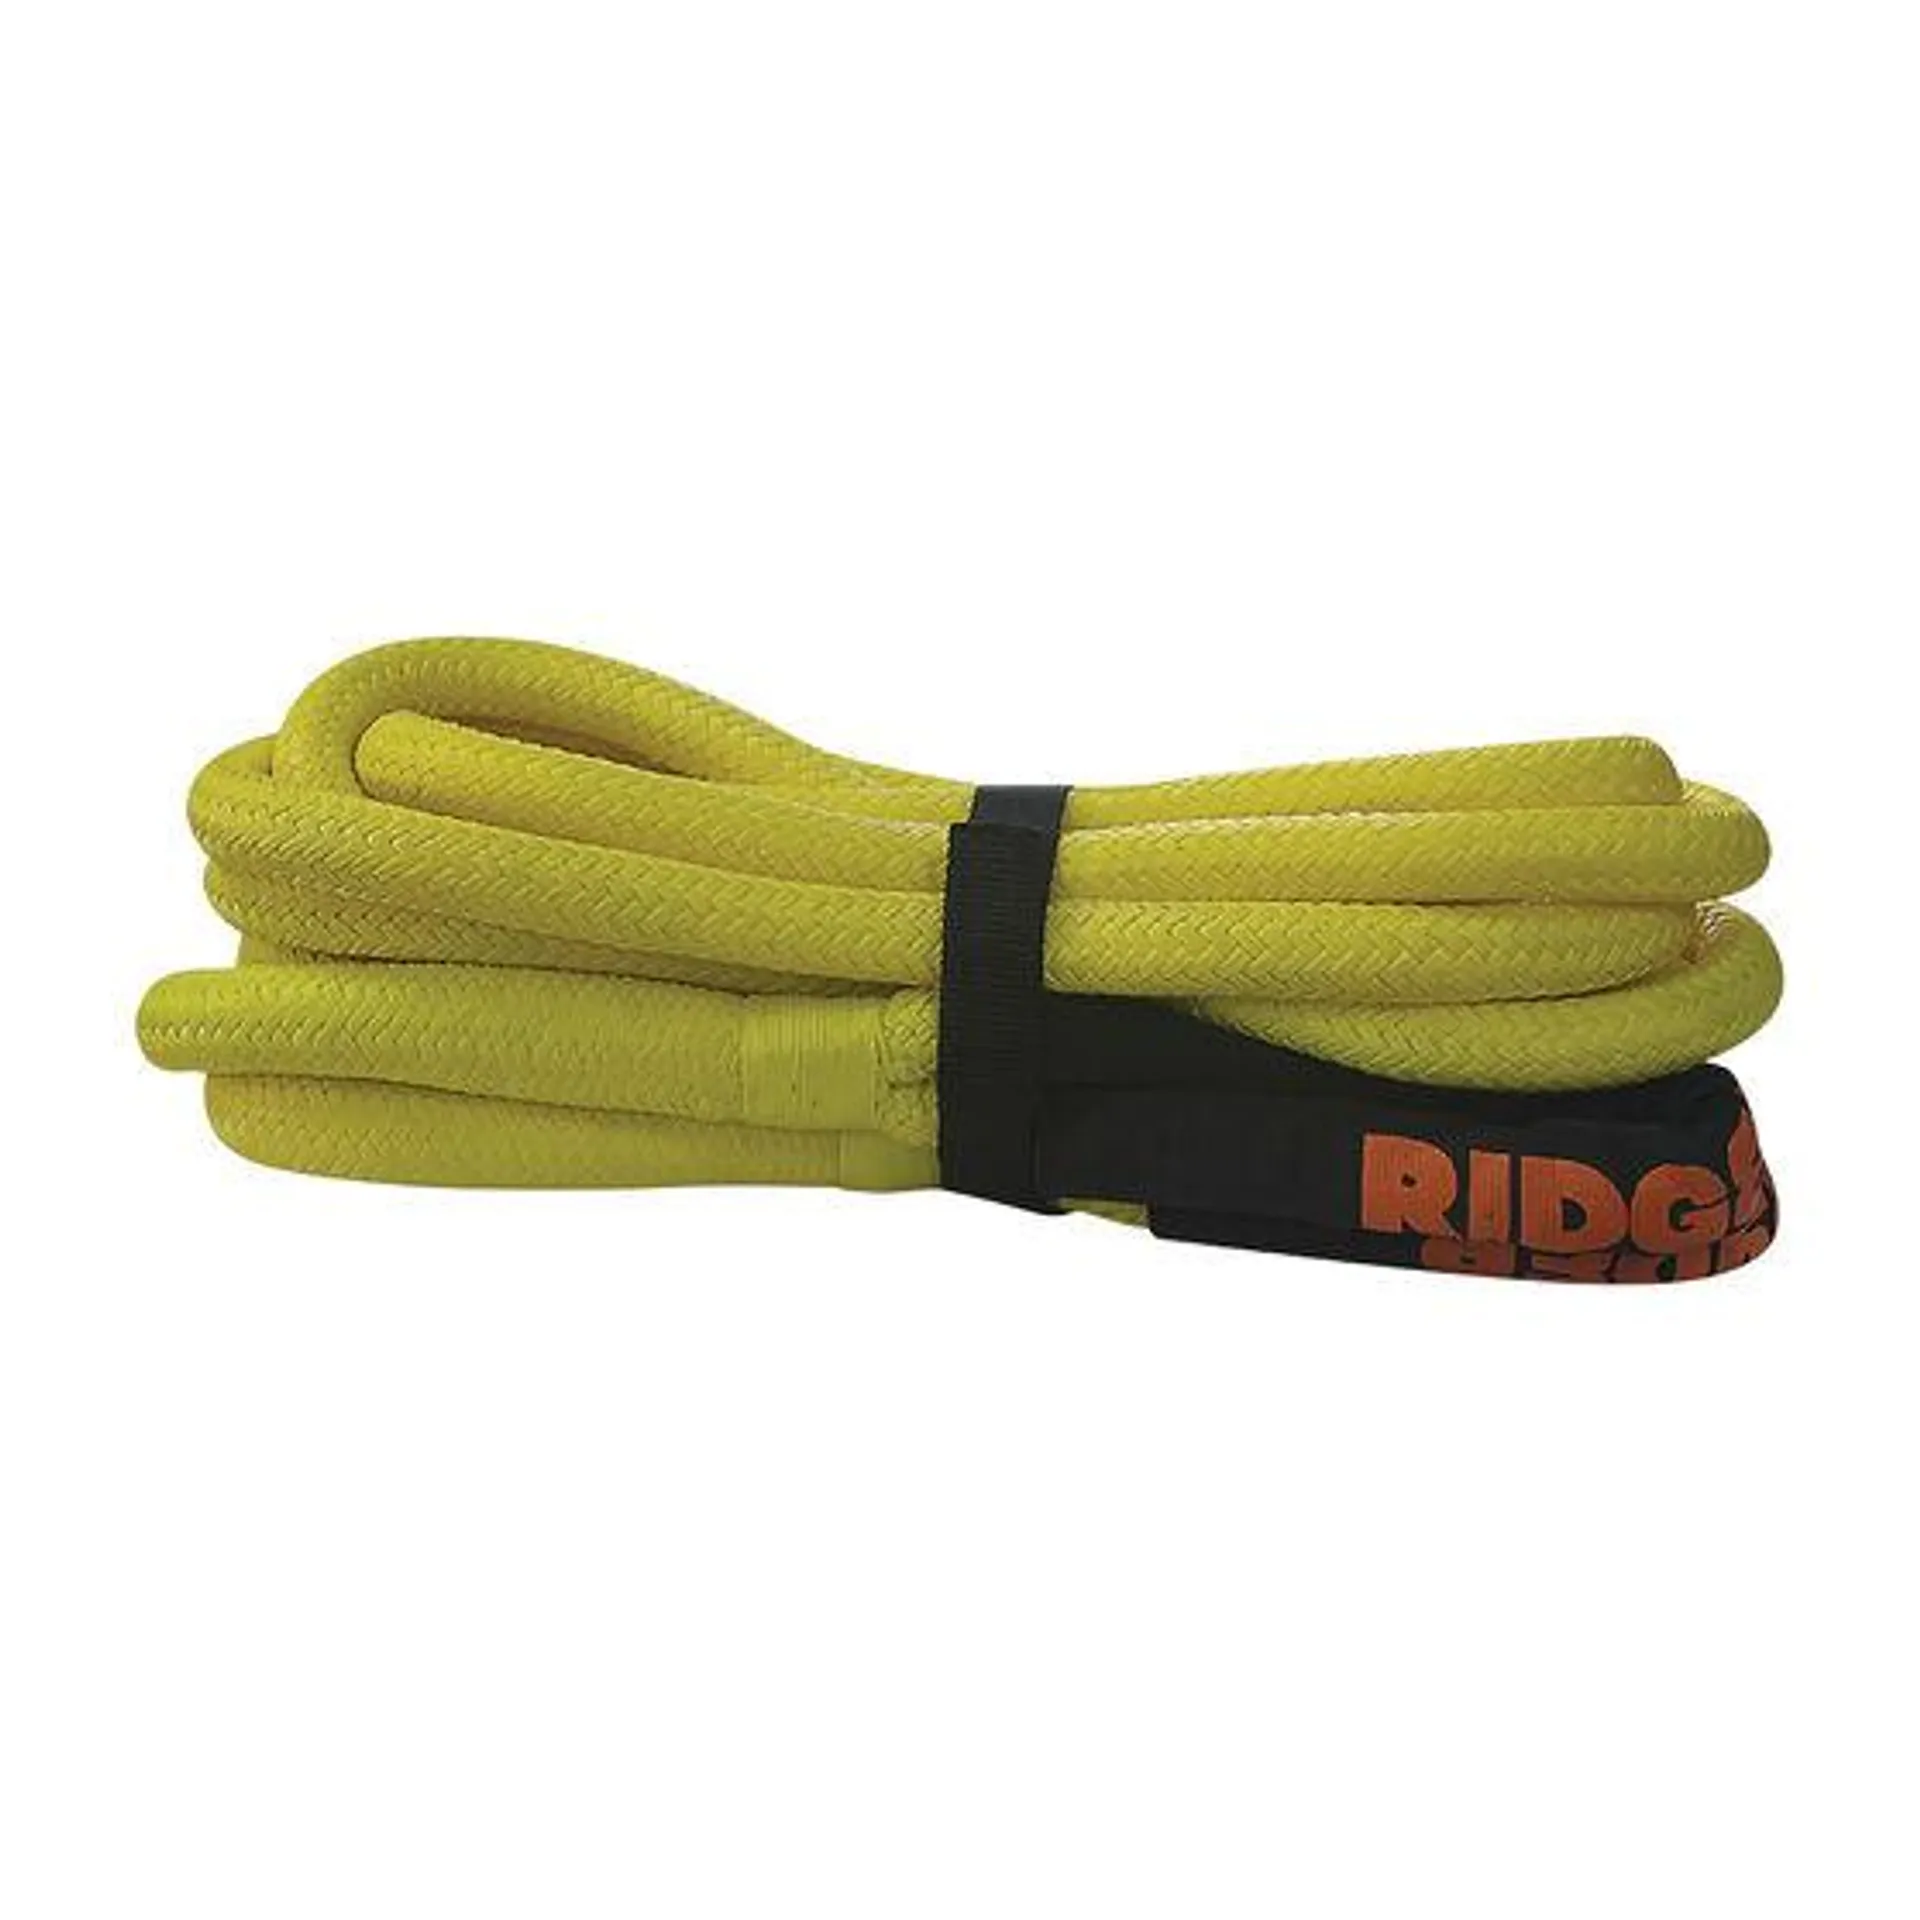 Ridge Ryder Kinetic Recovery Rope 9m 8,000Kg